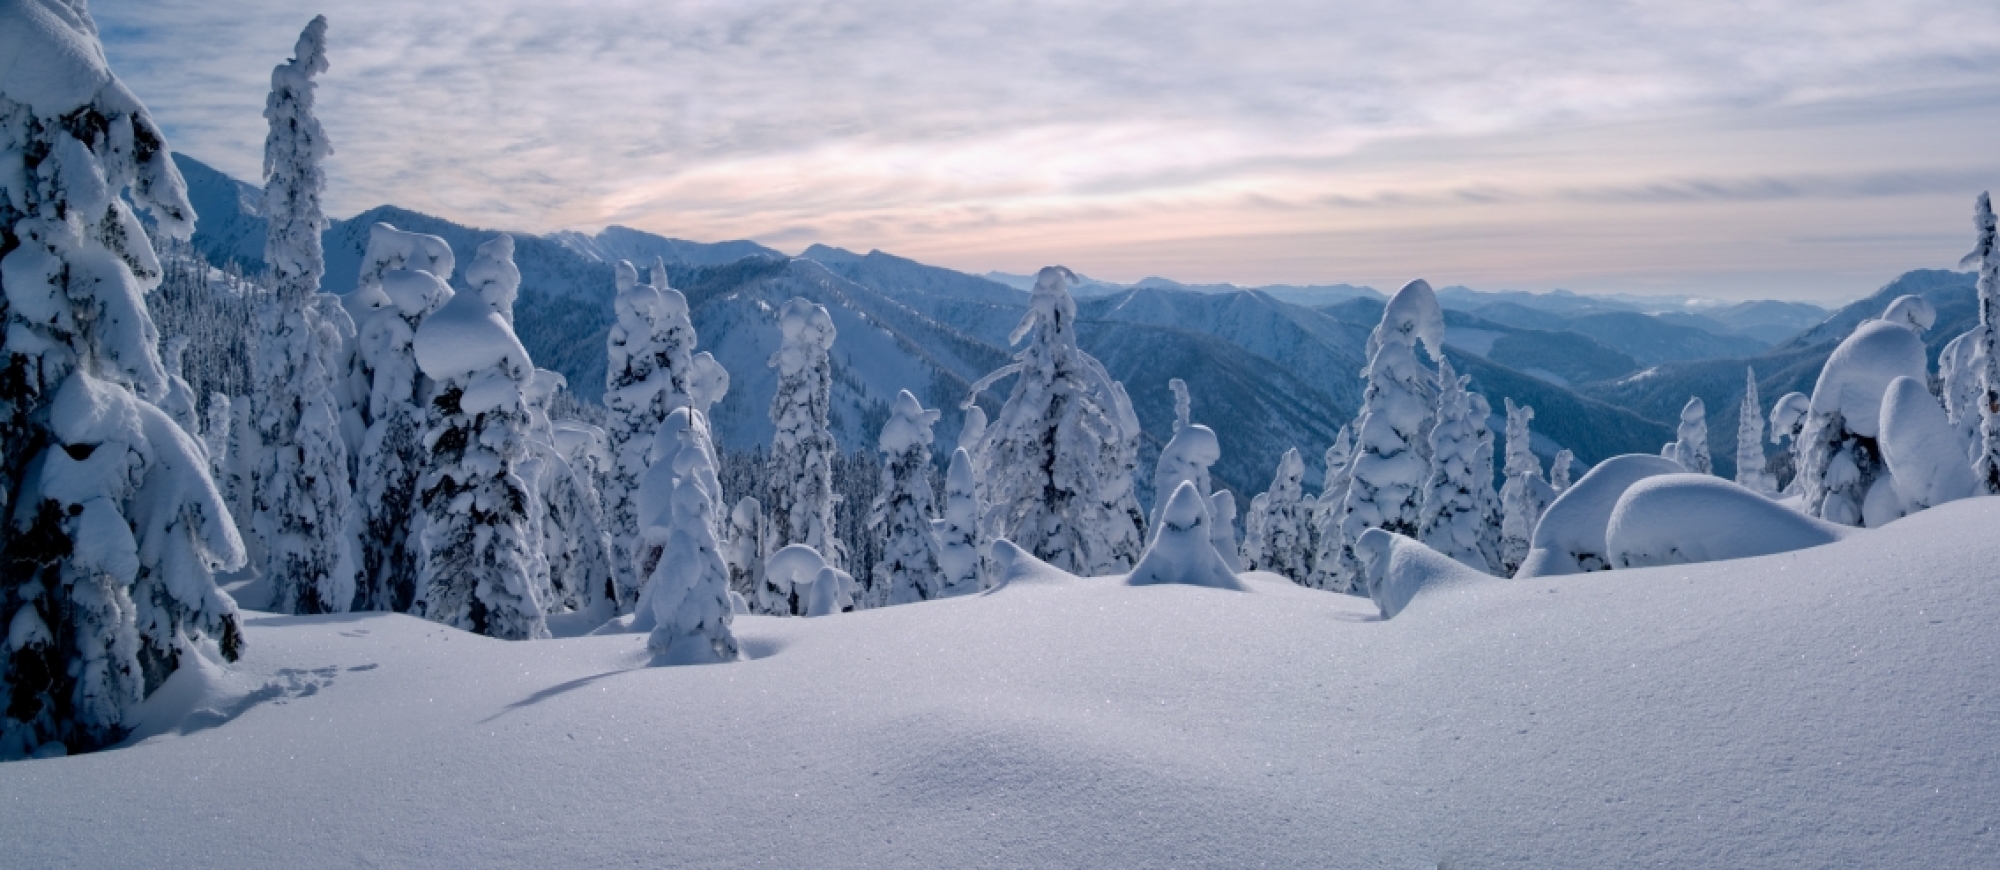 Snow-capped trees set amongst mountains at sunset